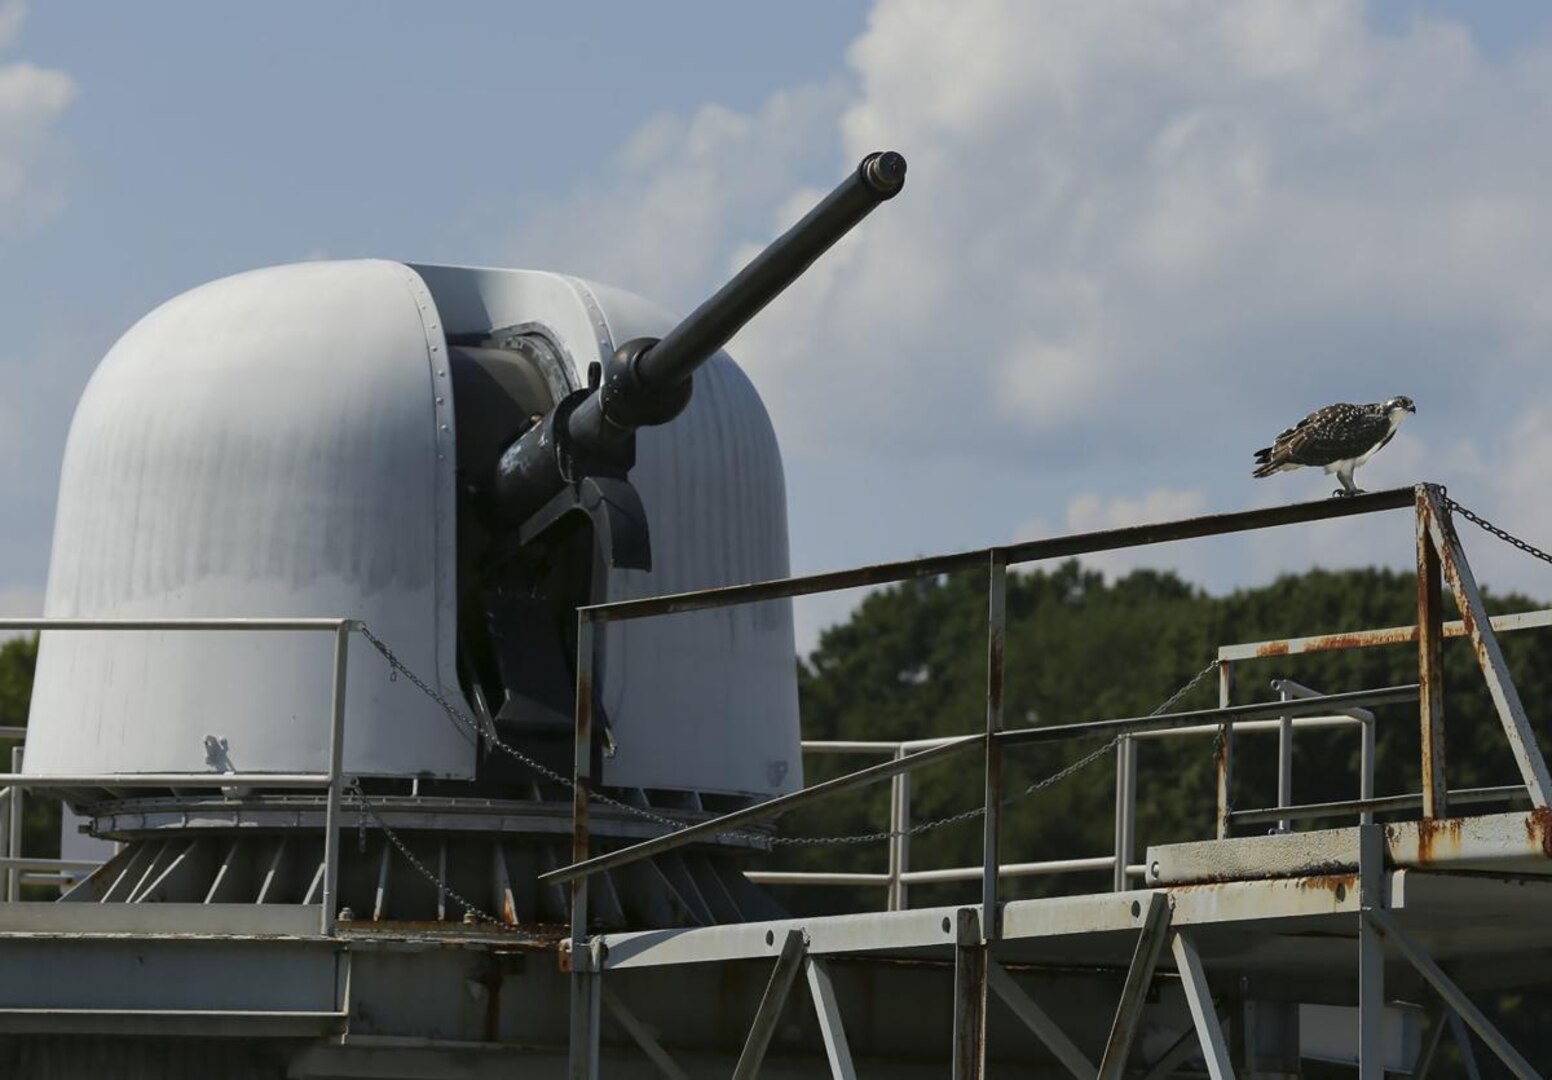 IMAGE: An osprey perches near one of the artillery pieces used at the Potomac River Test Range at Dahlgren. NSWCDD maintains the only fully instrumented test range over water in the nation.